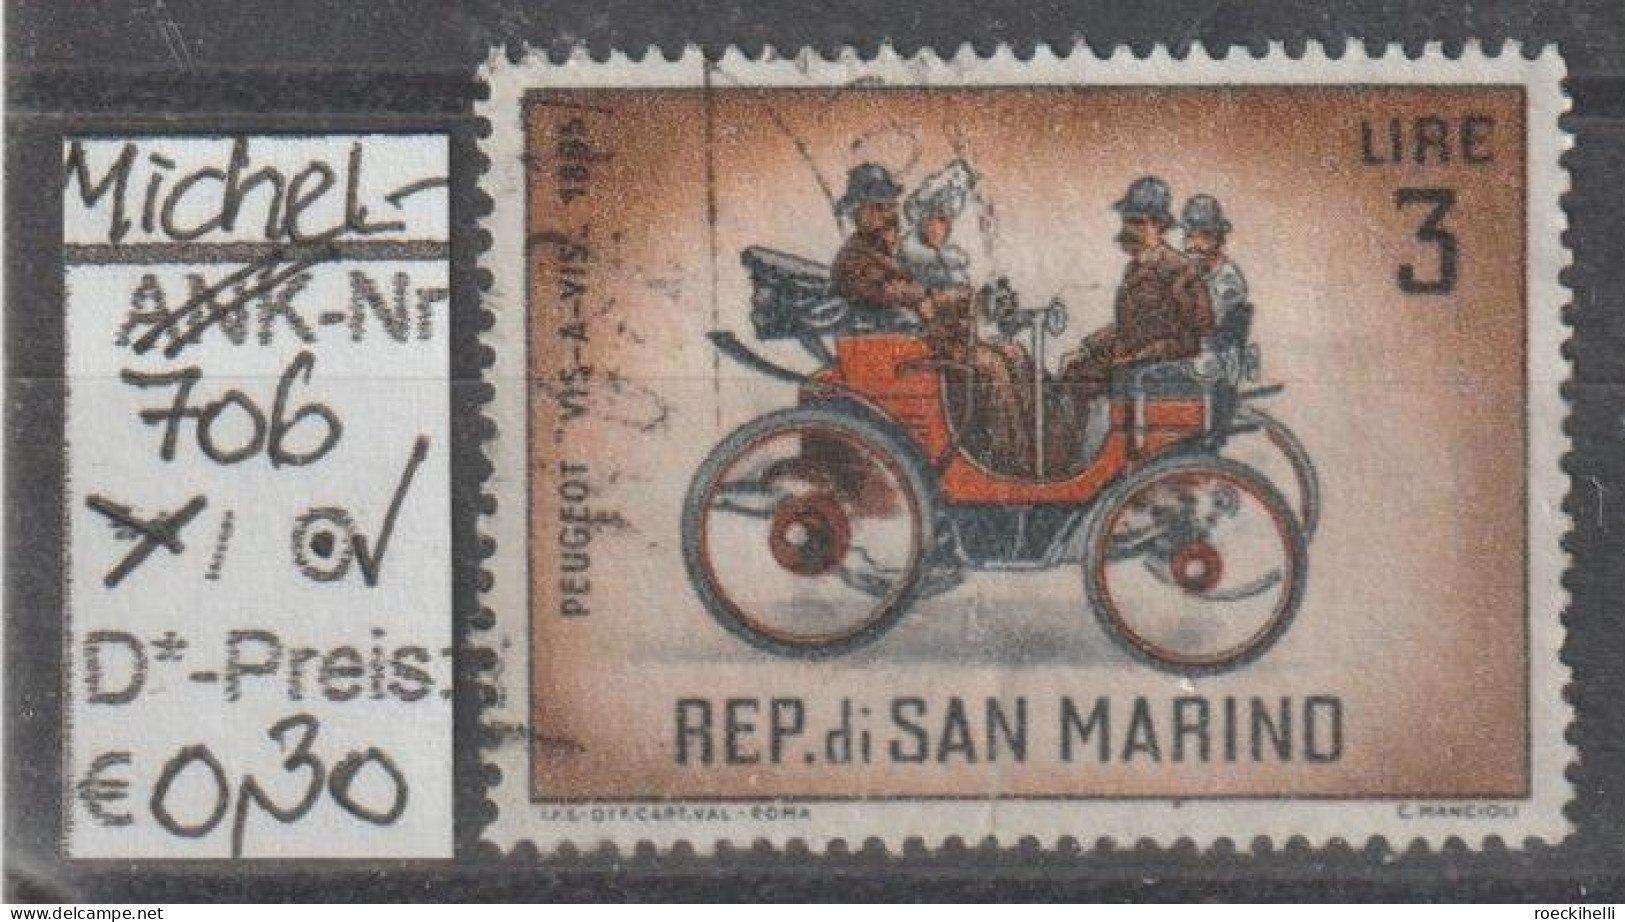 1962 - SAN MARINO - SM "Alte Automobile - Peugeot" 3 L Mehrf. - O Gestempelt  - S.Scan (706o S.marino) - Used Stamps